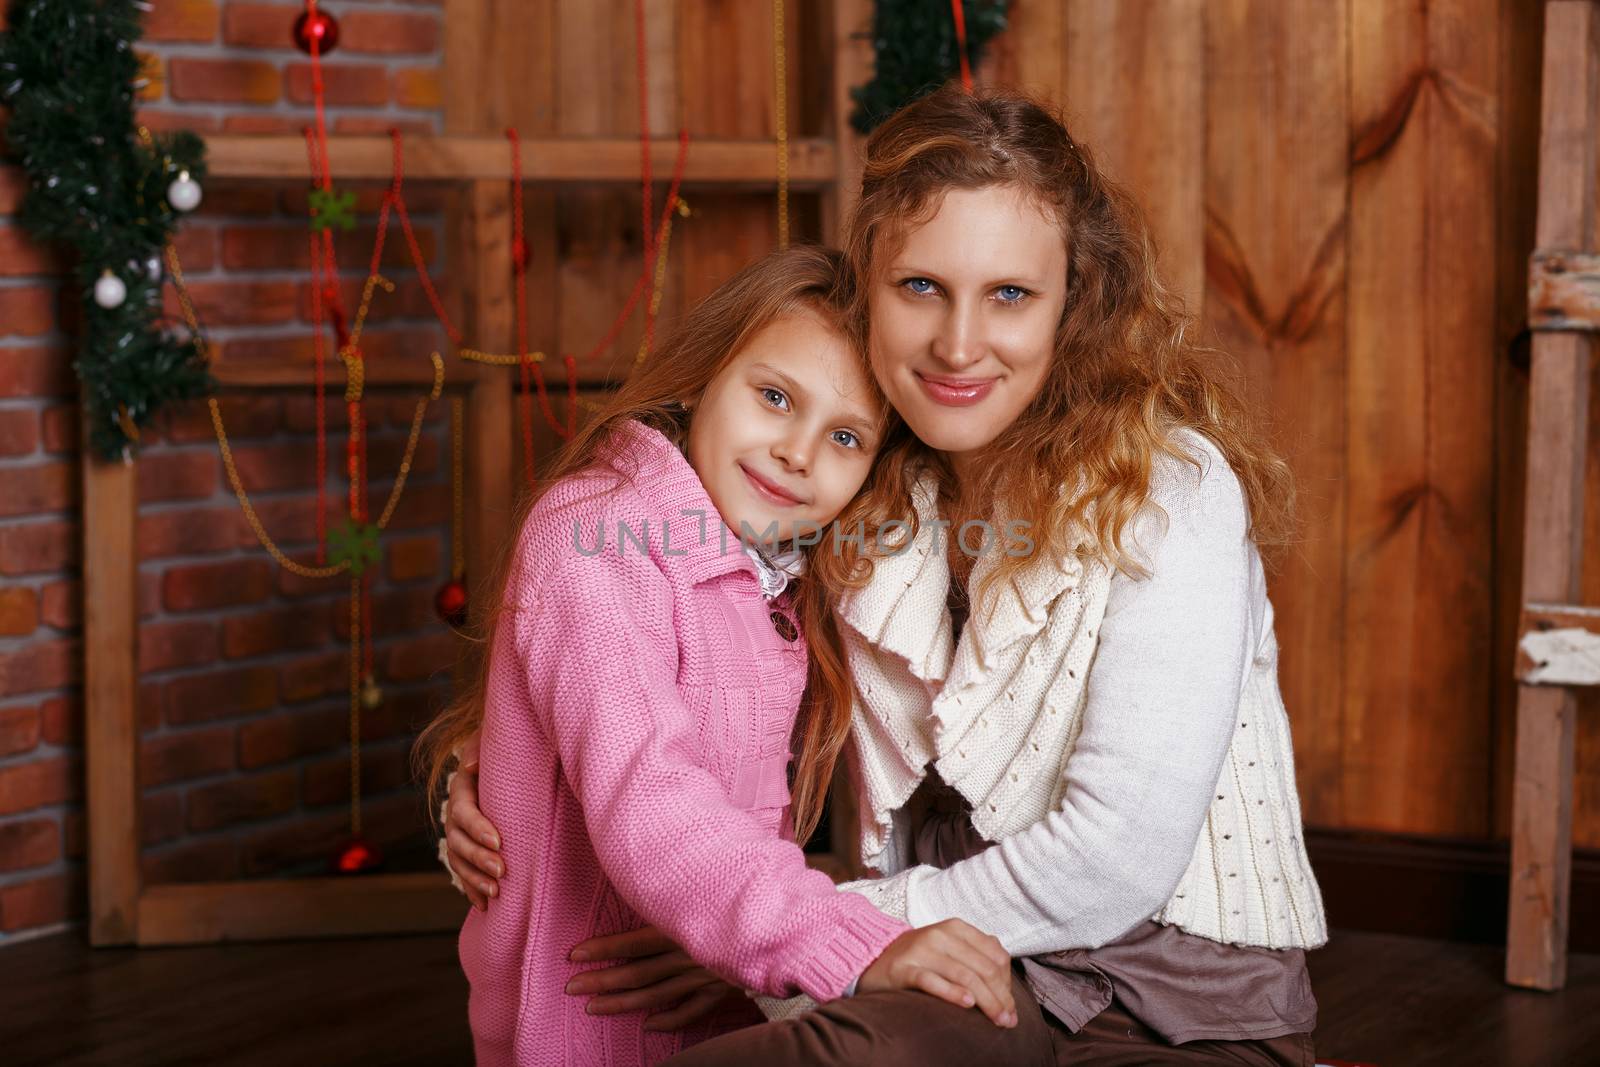 Portrait of happy smiling little girl with mother sitting among Christmas decorations